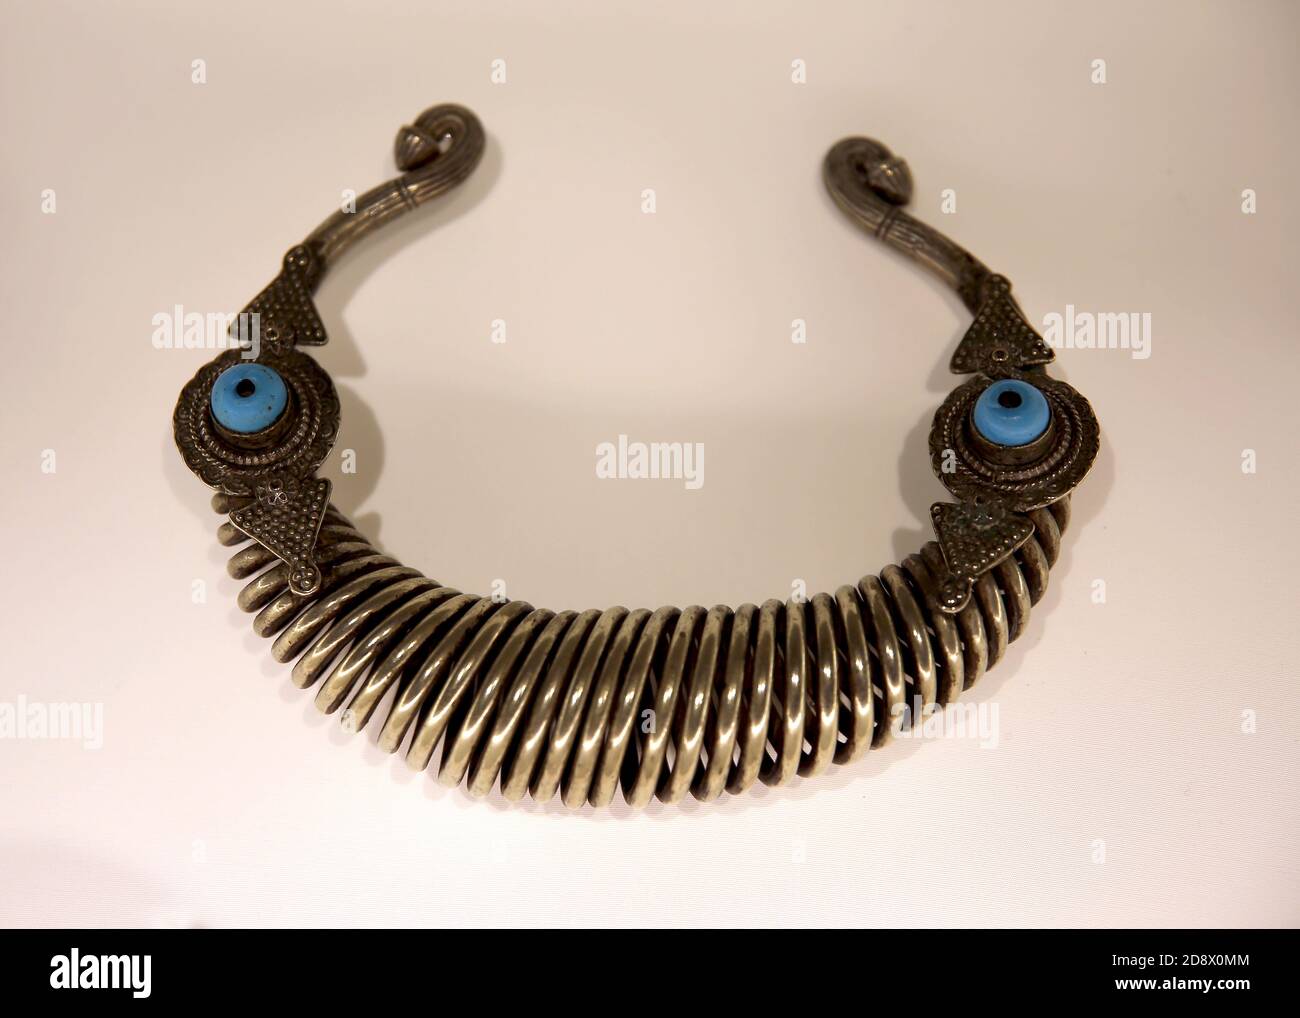 Gira or gre torque (torc). Nuristan, Afghanistan. 19th century. Silver with  turquoises. Museum of World Cultures. Barcelona, Spain. Stock Photo